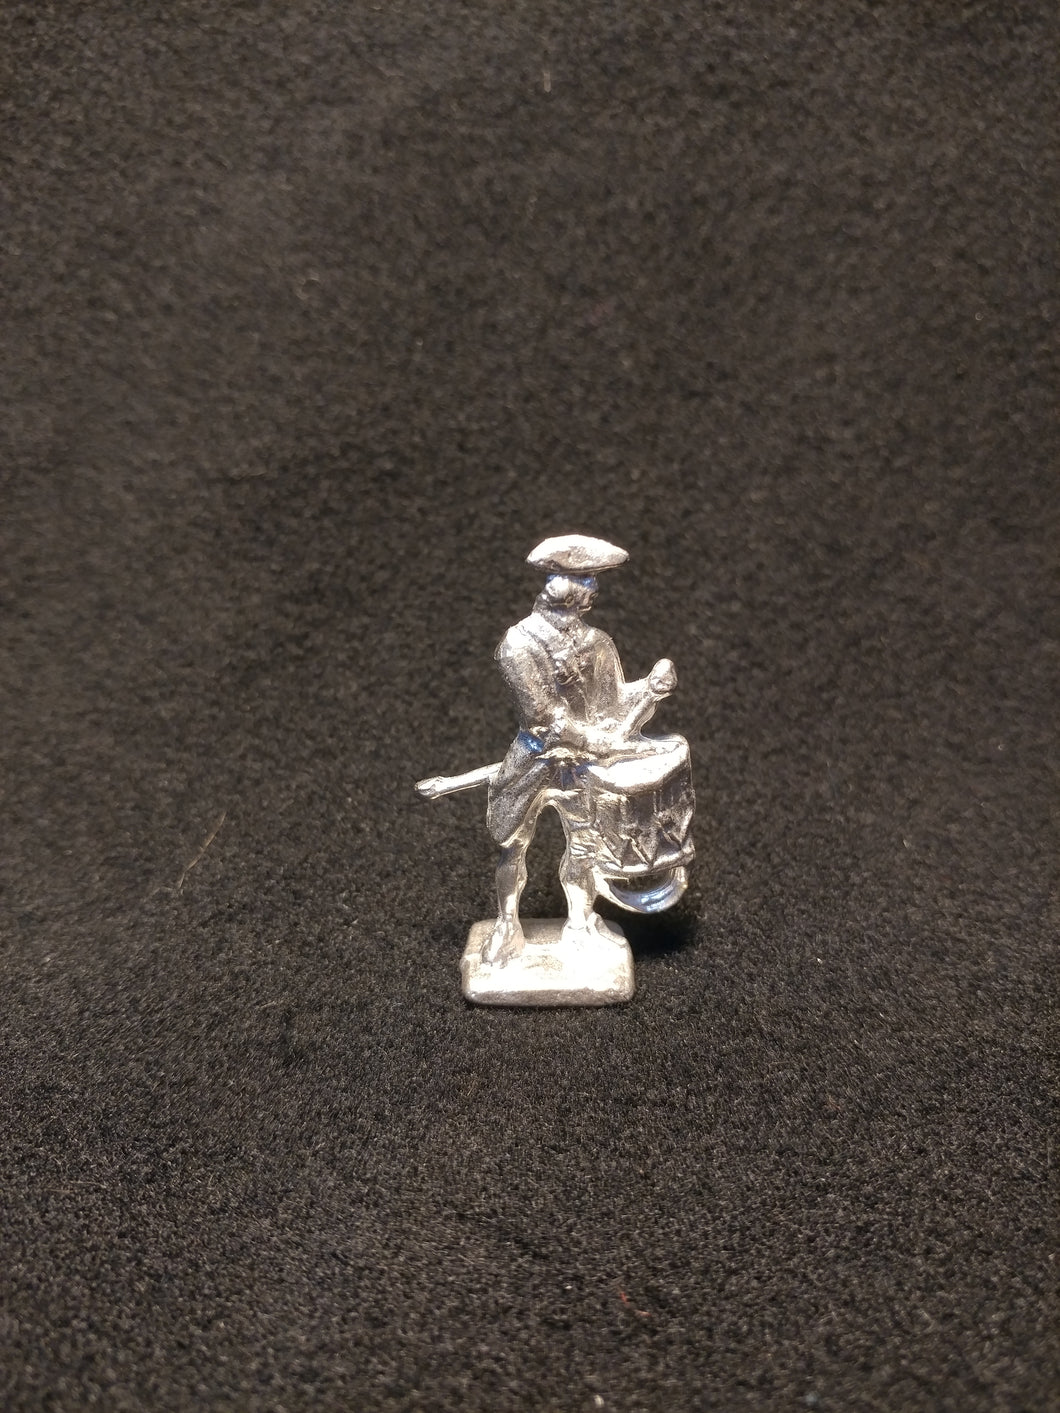 Reproduction 18th Century Tin Soldier - Drummer